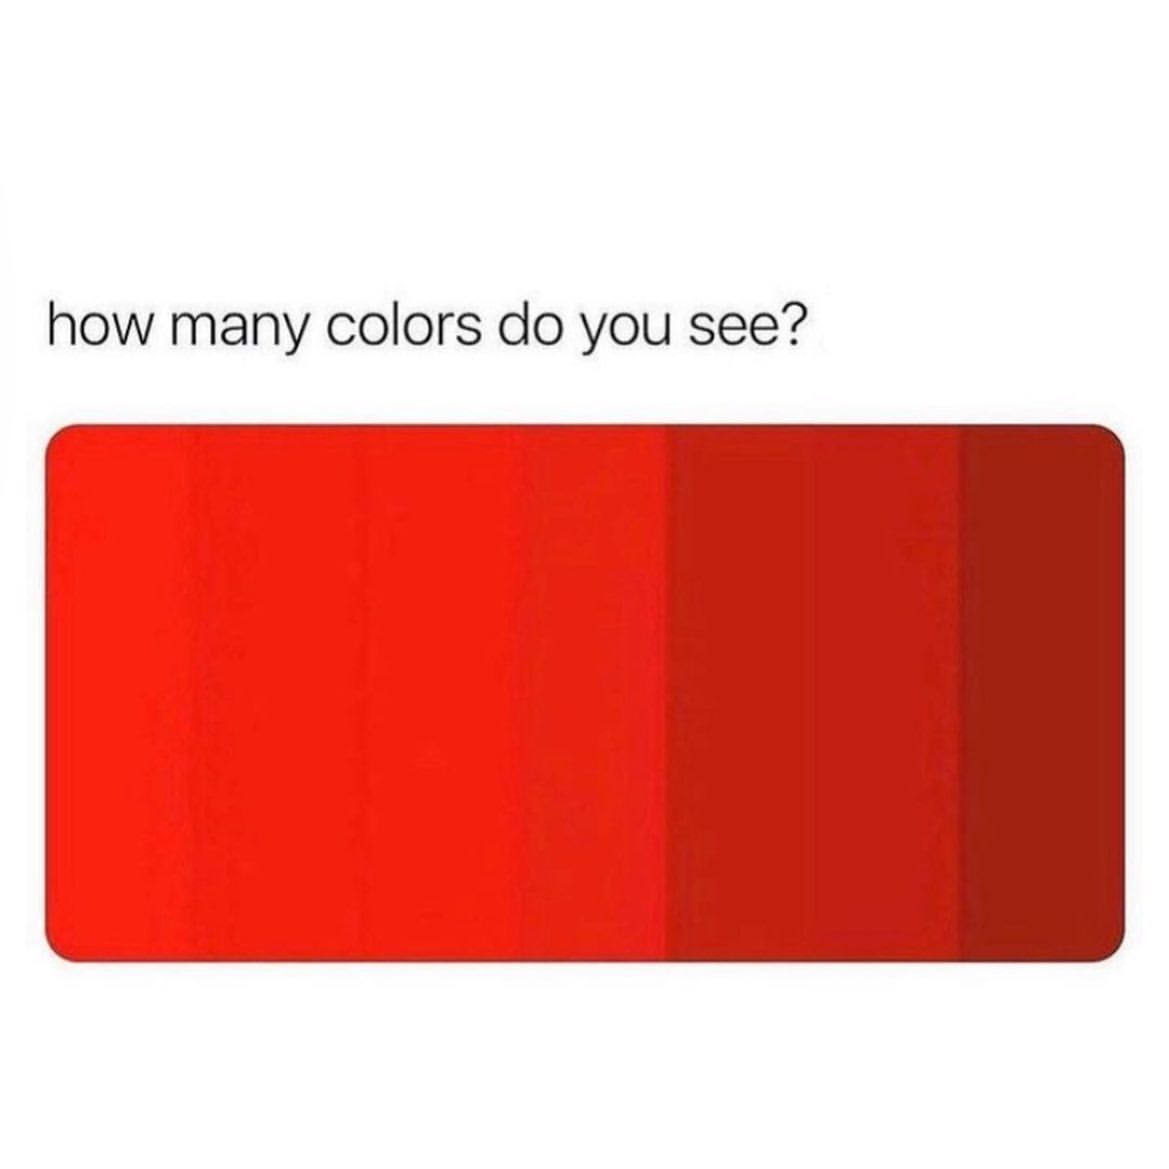 How many colors do you see?